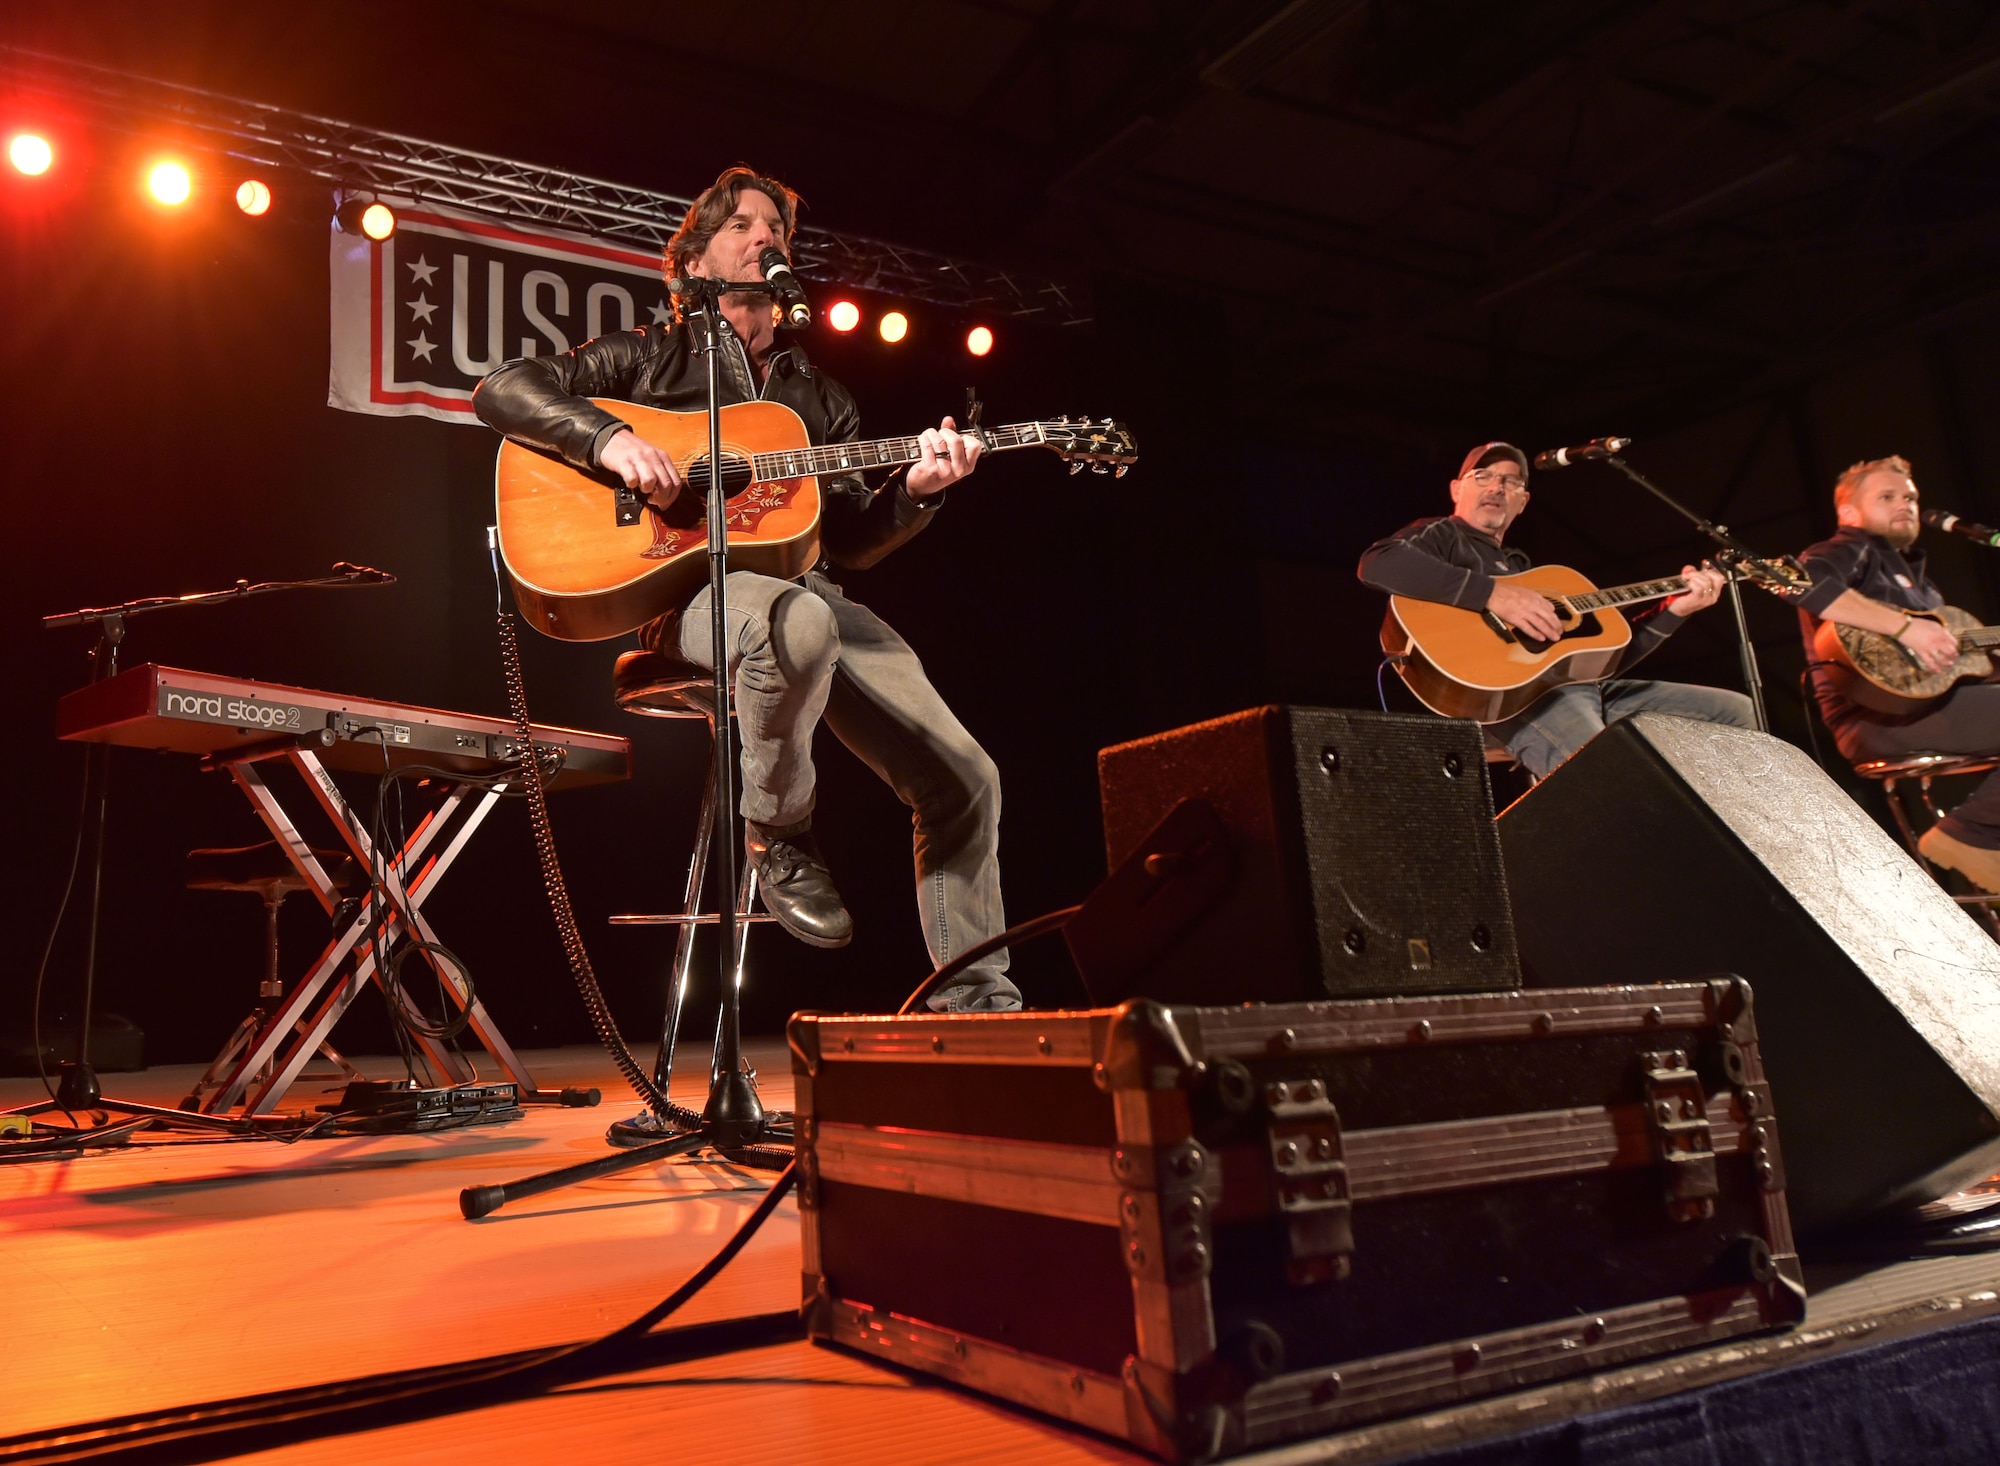 Singer and songwriter Brett James, along with Billy Montana and Kyle Jacobs, perform for the audience during the 2015 USO Holiday Troop Tour Dec. 9, 2015, at Ramstein Air Base. The entertainers gave away signed posters, movies, and other items to thank the service members and their families for their services and sacrifices. (U.S. Air Force photo/Staff Sgt. Leslie Keopka)